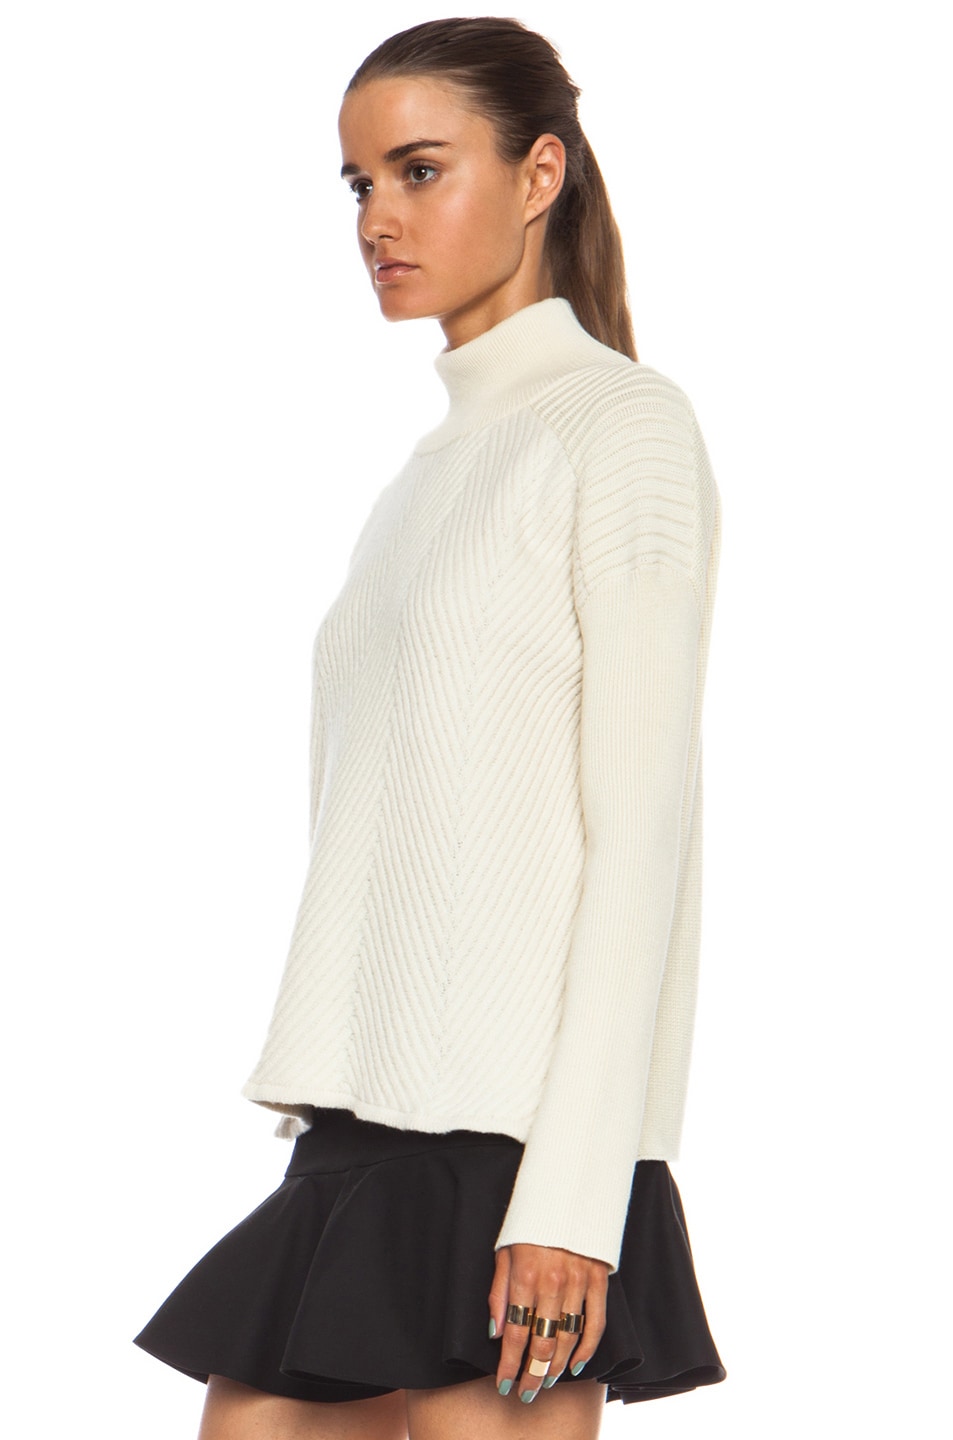 McQ Alexander McQueen Cable High Neck Wool Jumper in Off White | FWRD